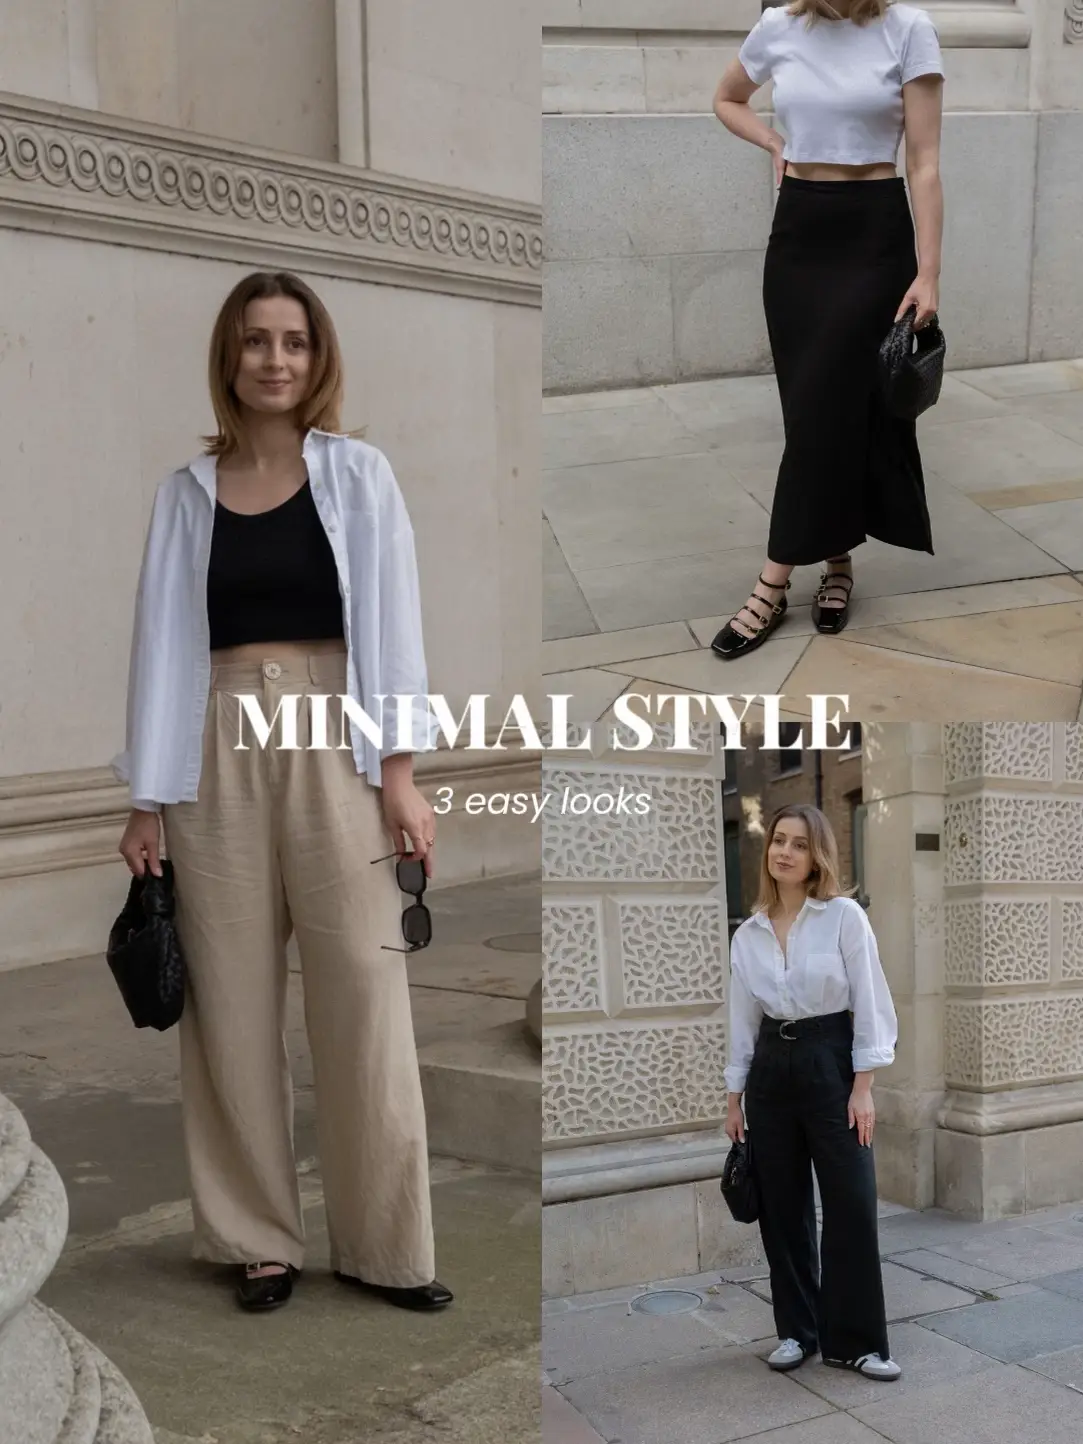 3 easy MINIMAL STYLE looks 🤍  Gallery posted by Sarah Mantelin